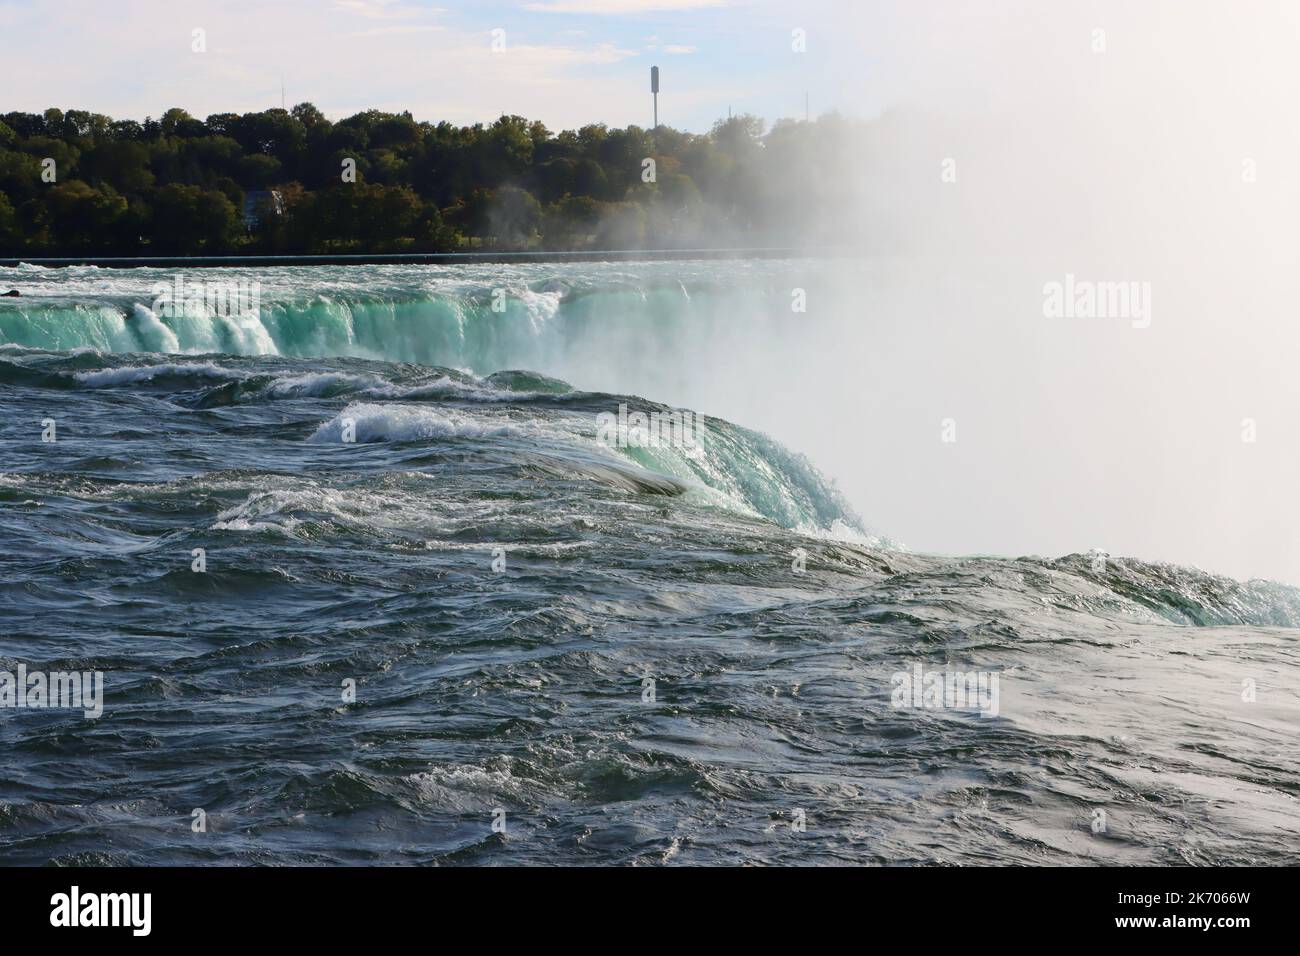 The Horseshoe Falls of the Niagara Falls seen from the American side of the falls Stock Photo